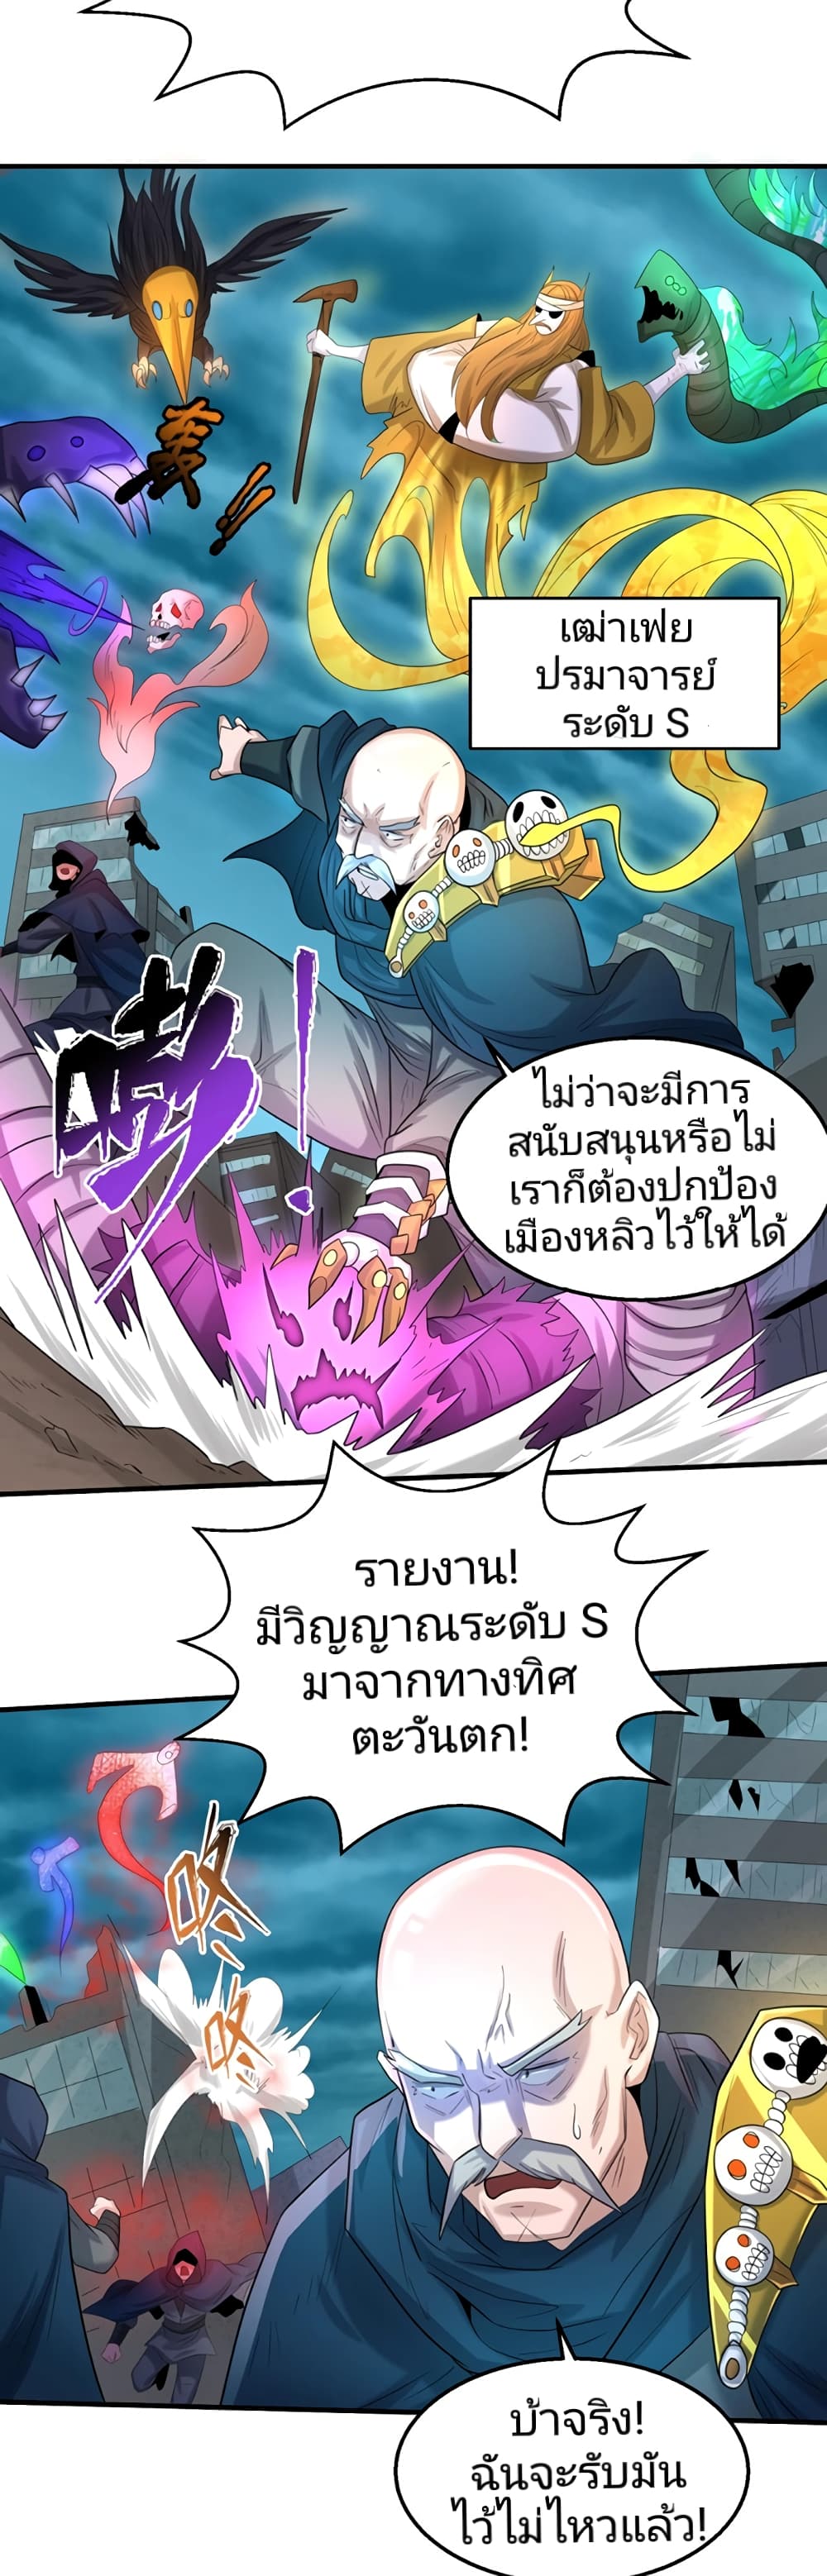 The Age of Ghost Spirits à¸à¸­à¸à¸à¸µà¹ 28 (34)